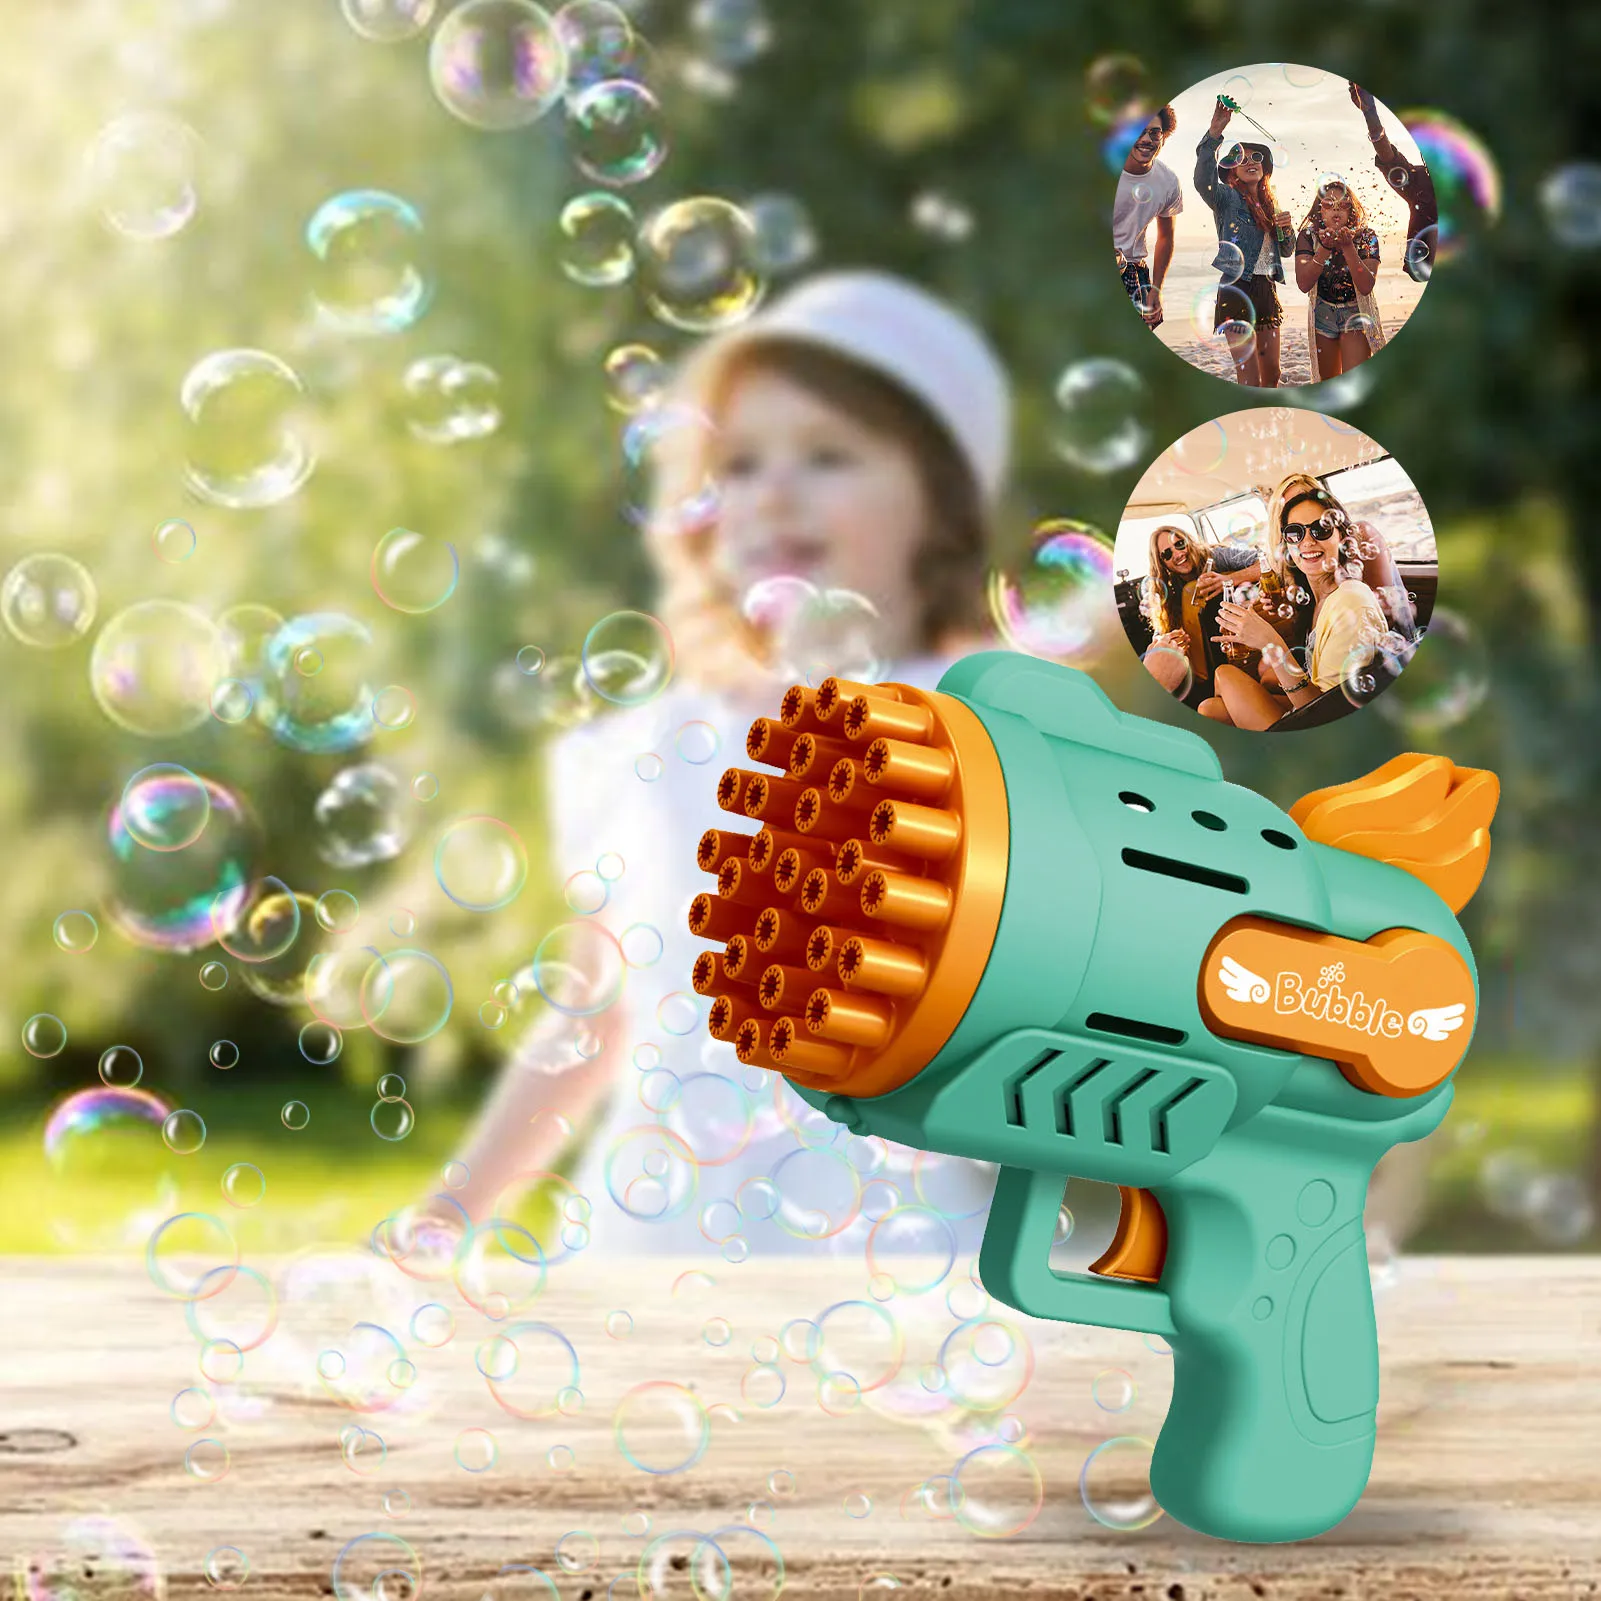 Bubble Gun Rocket 29 Hole Automatic Soap Bubbles Machine Outdoor Toy for Boys Birthday Gifts Wedding Party Children Summer Gift 36 hole bubble machine toy electric soap water bubble blower with light summer party outdoor toy for kids children gift